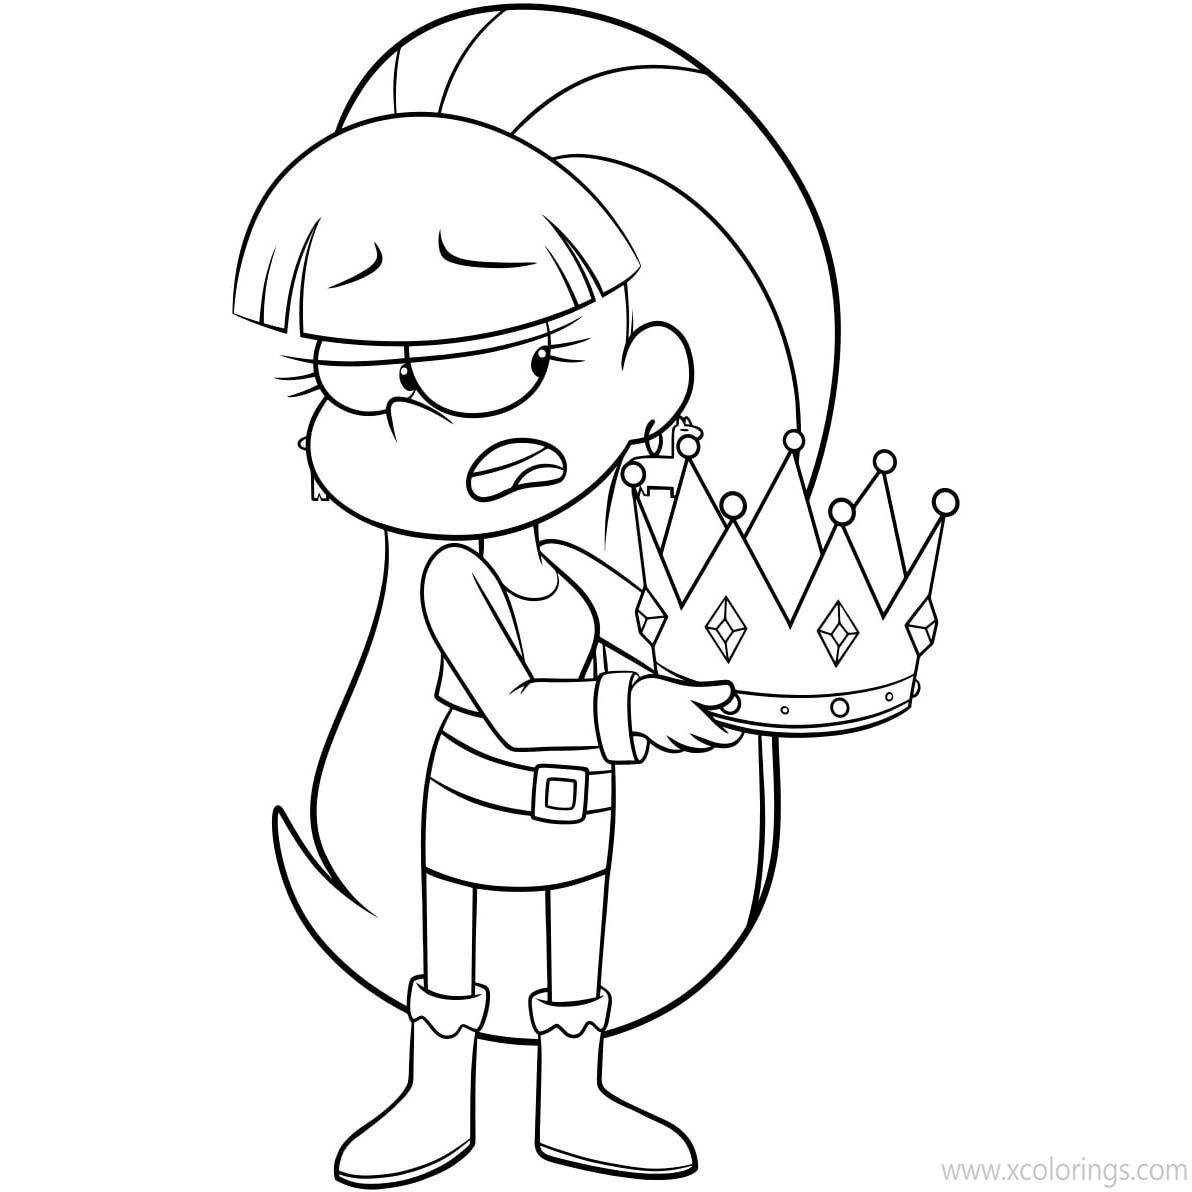 Free Gravity Falls Coloring Pages Pacifica with a Crown printable